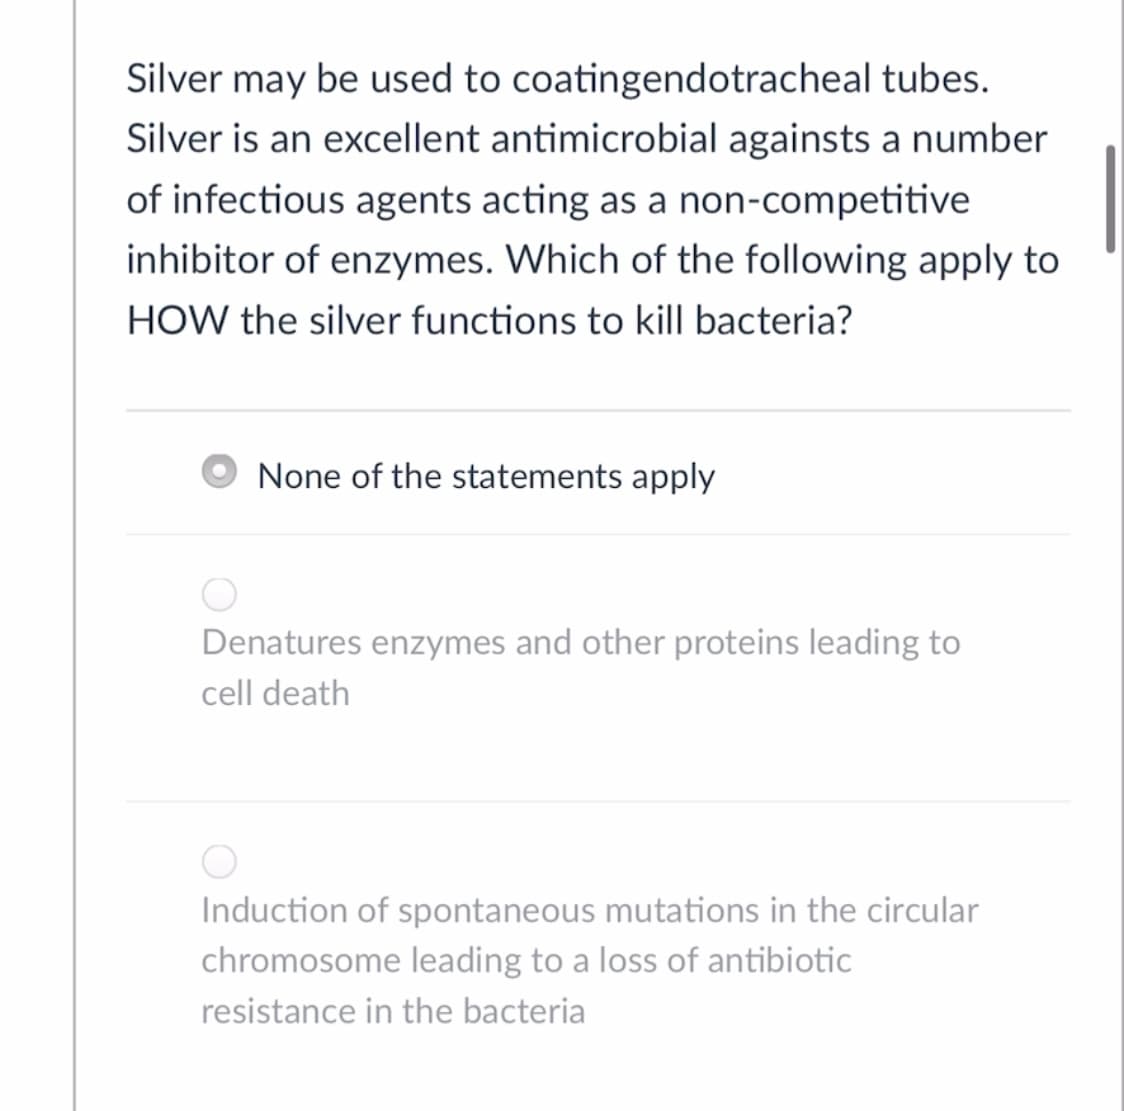 Silver may be used to coatingendotracheal tubes.
Silver is an excellent antimicrobial againsts a number
of infectious agents acting as a non-competitive
inhibitor of enzymes. Which of the following apply to
HOW the silver functions to kill bacteria?
None of the statements apply
Denatures enzymes and other proteins leading to
cell death
Induction of spontaneous mutations in the circular
chromosome leading to a loss of antibiotic
resistance in the bacteria
